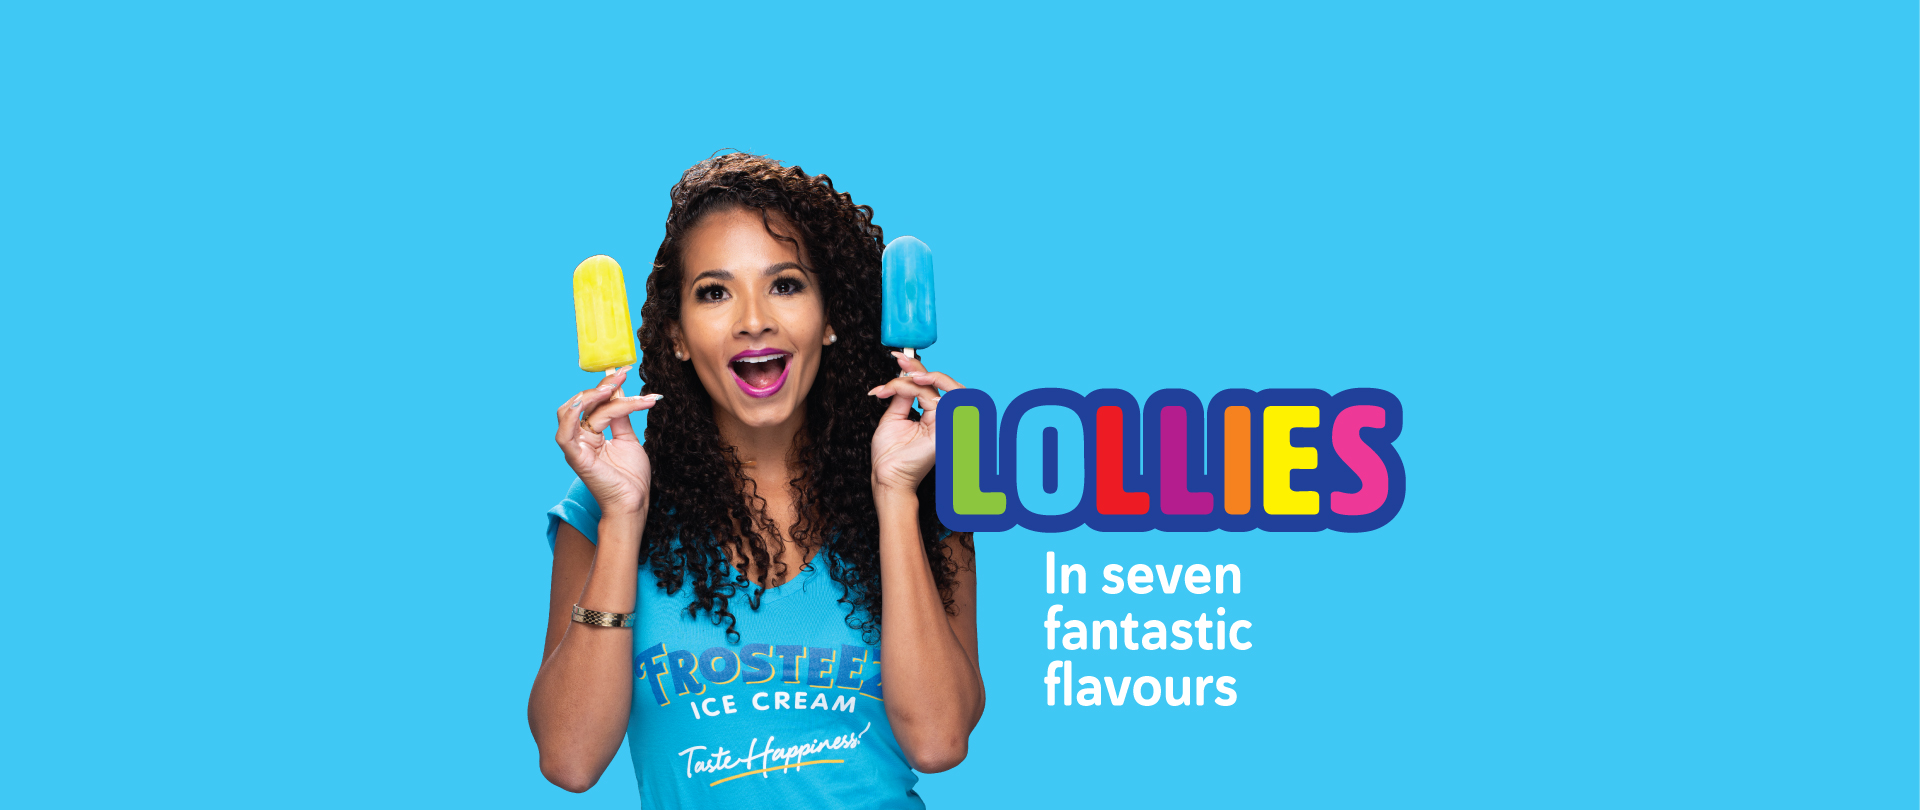 lollies ad